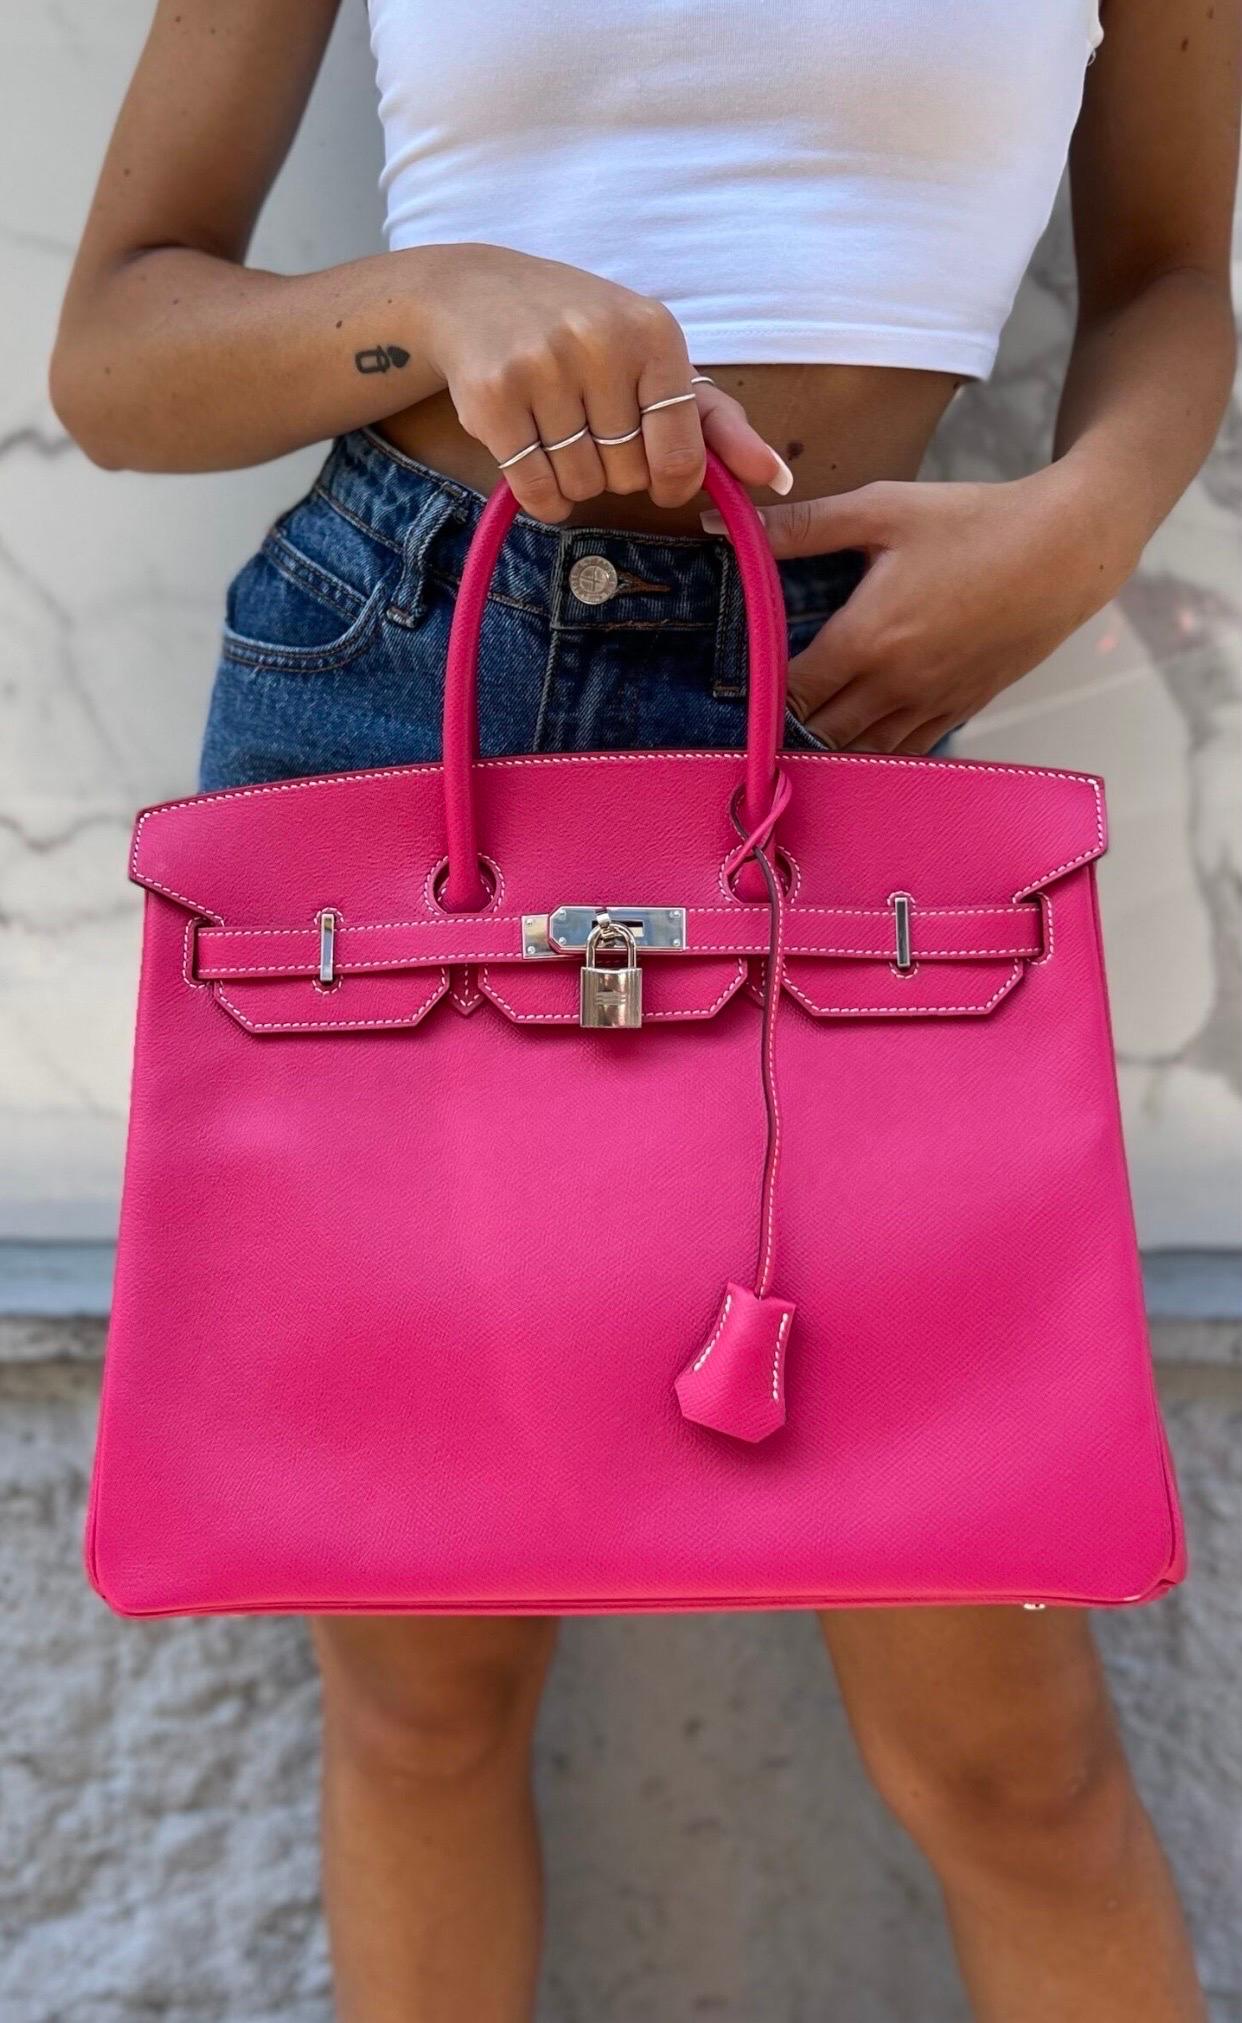 Hermès bag, Birkin model, size 35, made of rose tyrien Epsom leather with silver hardware. Equipped with a front flap with twist lock equipped with a padlock with keys. Internally lined in fuchsia smooth leather, very roomy. Equipped with two rigid